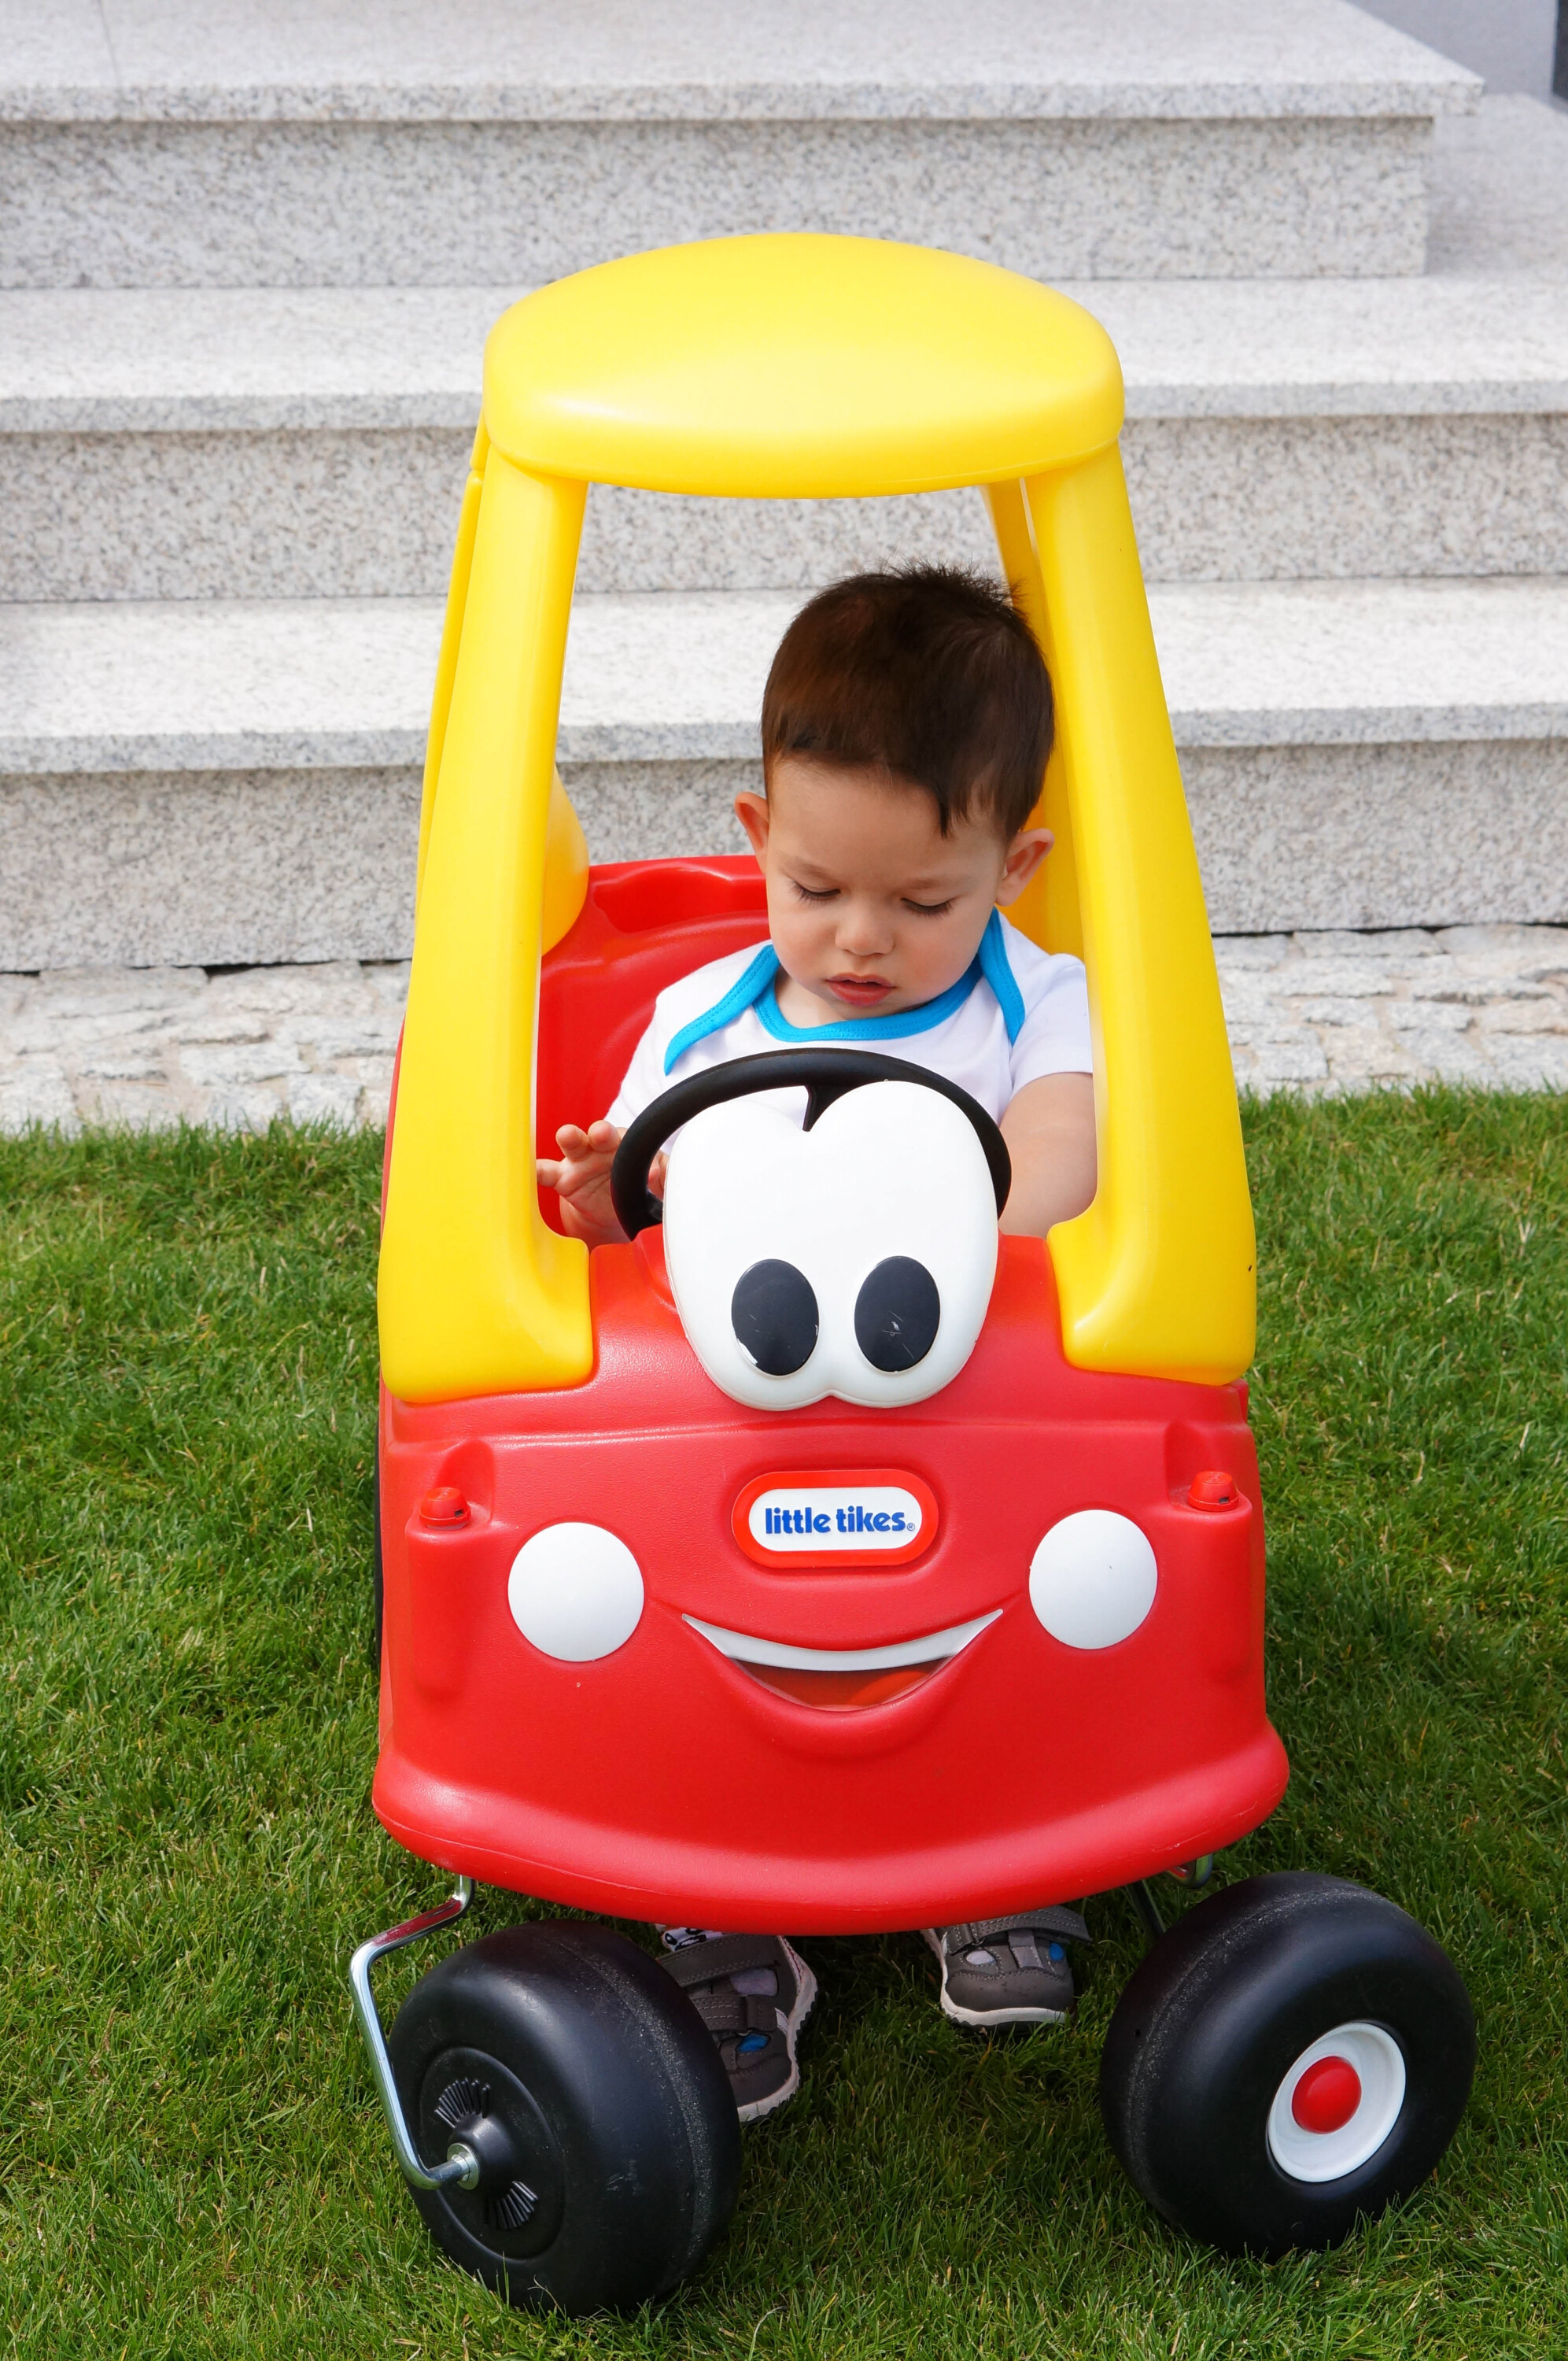 Small boy sitting in a Little Tikes plastic wheeled Cozy Coupe cart having a yellow superstructure, steering wheel, googly eyes and a red body with white circles simulating headlights, the Little Tykes logo where a nose might be below the eyes, and a smiling mouth under the logo.